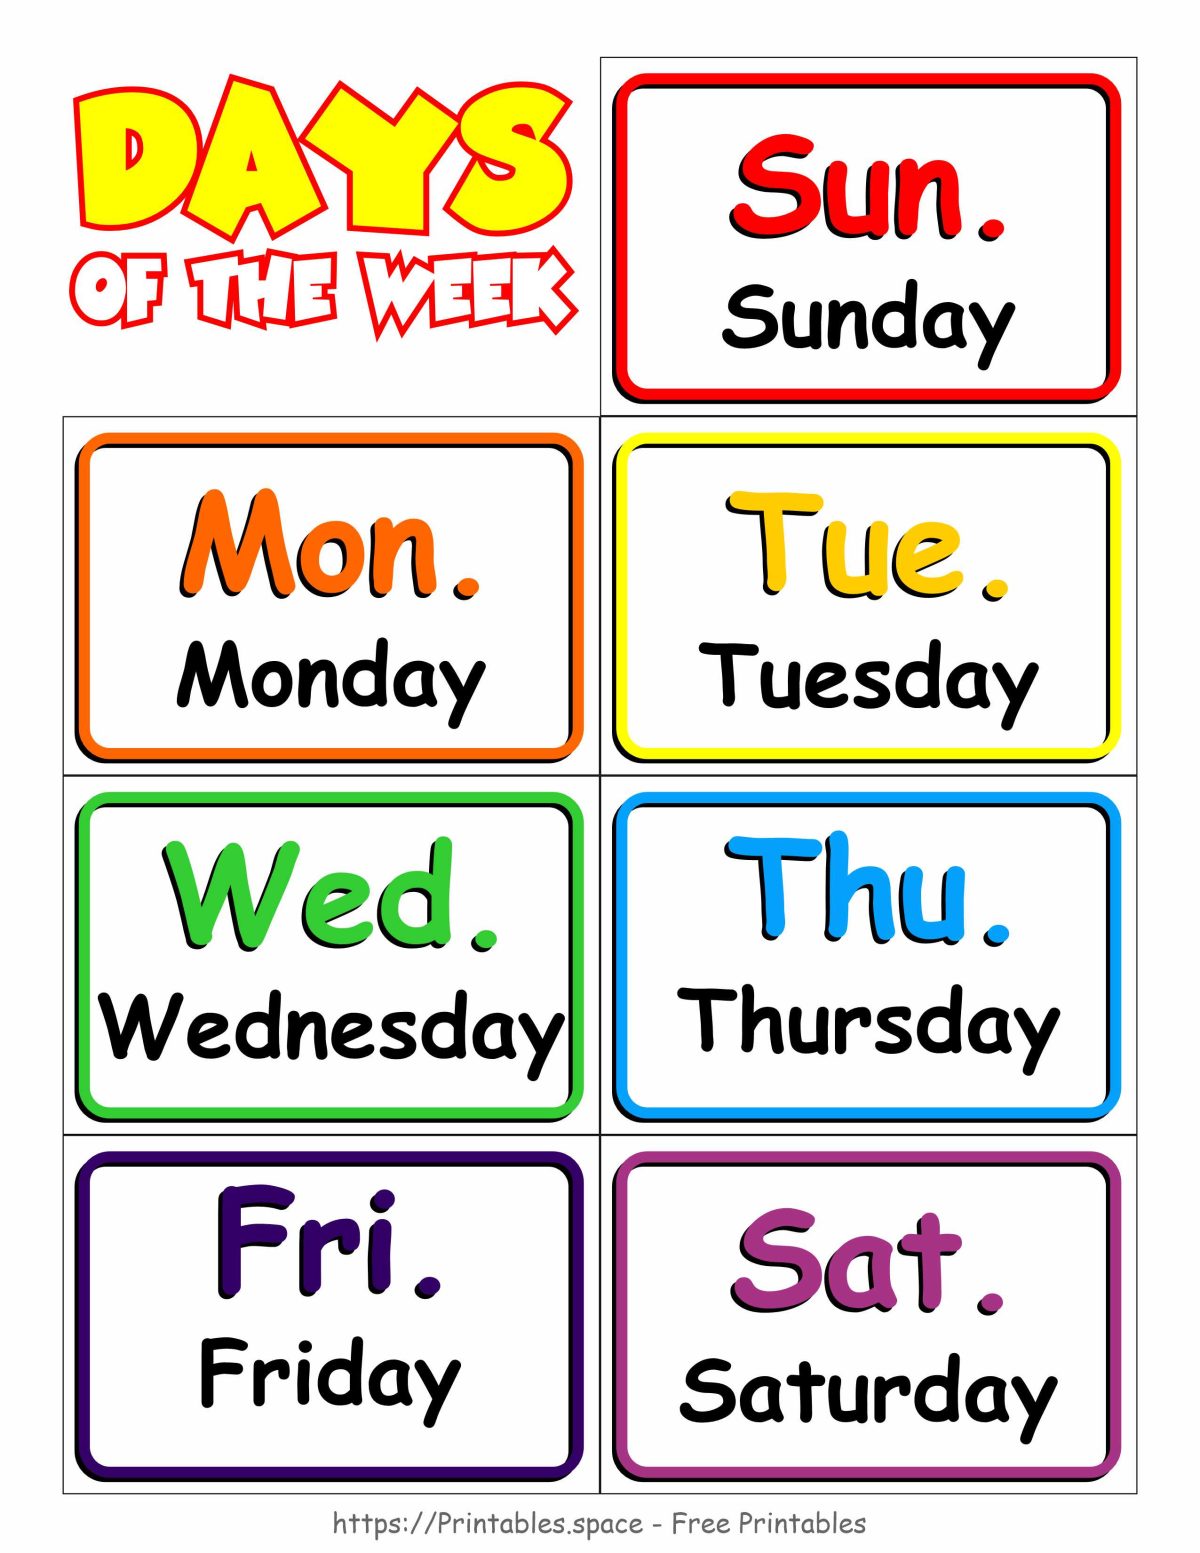 Days of the Week Cards